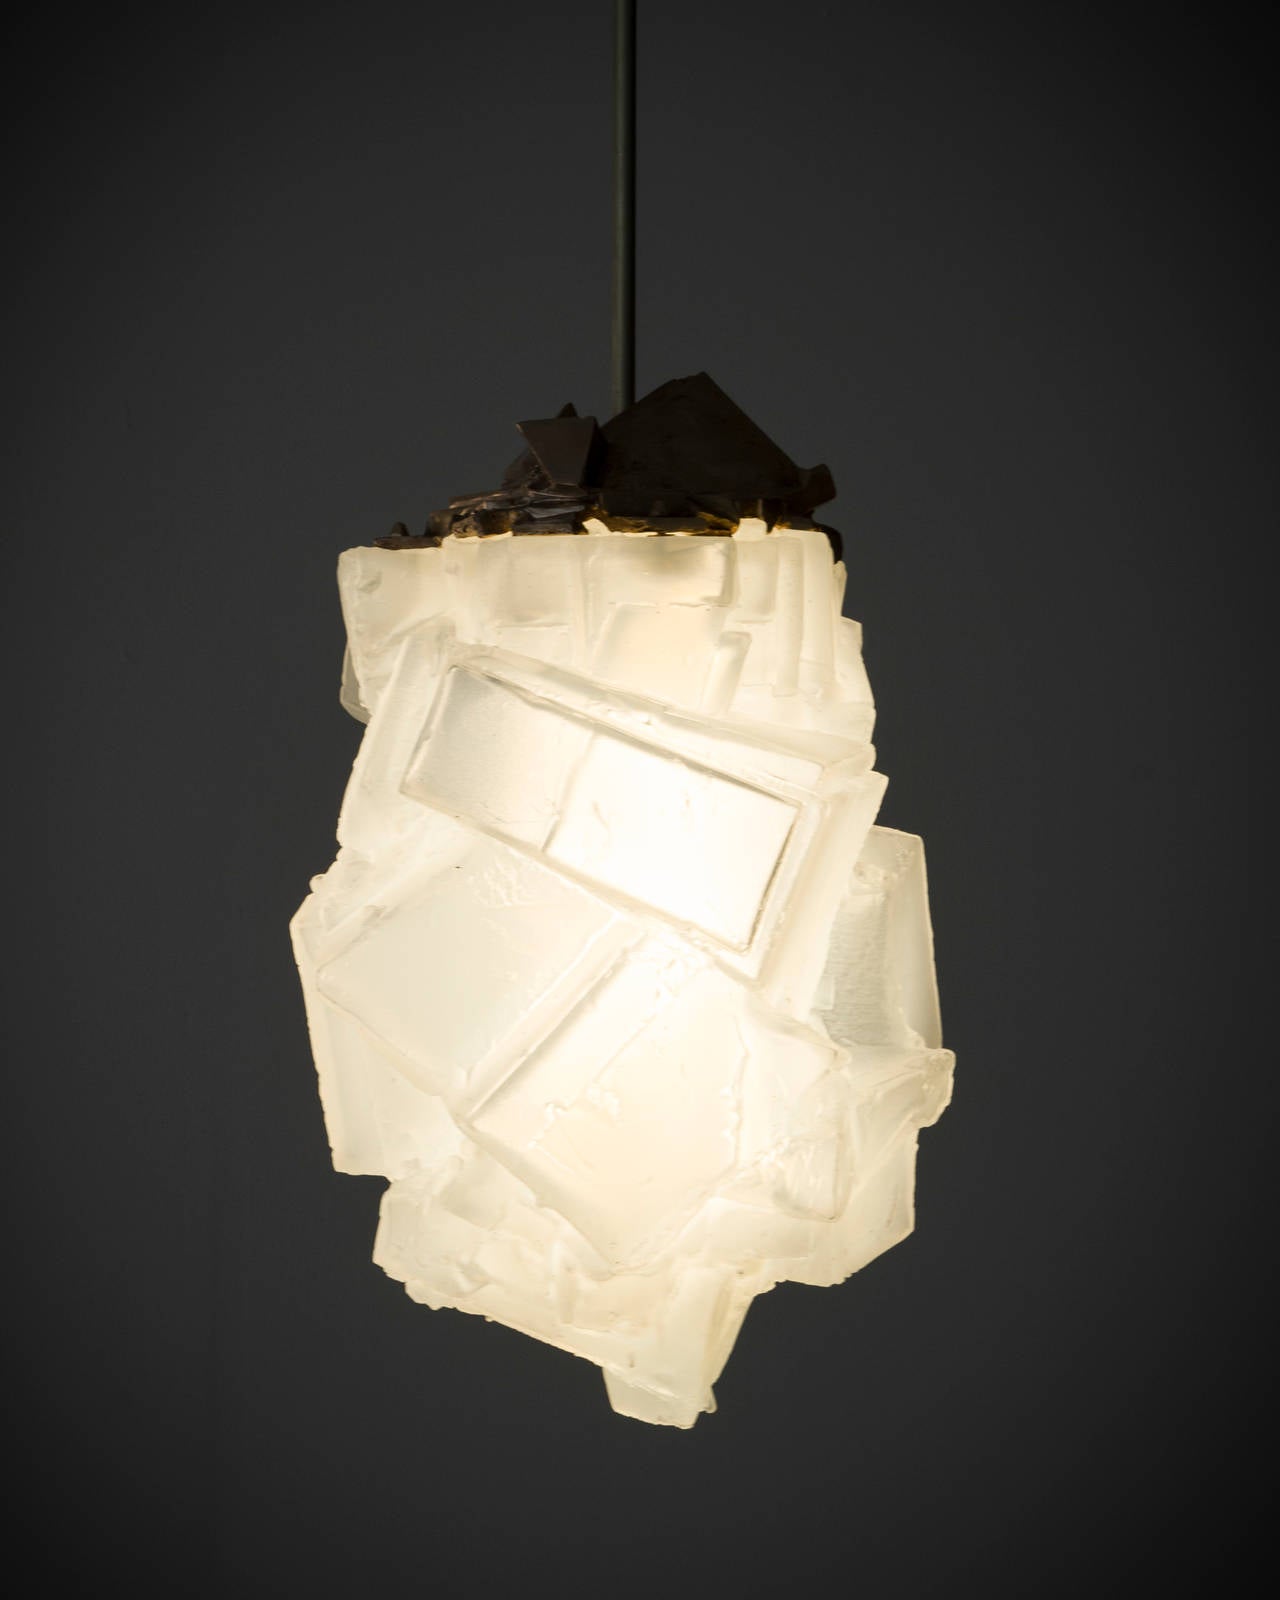 Unique Assemblage pendant lamp in opaline hand-blown, cut and polished glass. Designed and made by Thaddeus Wolfe, USA, 2014.